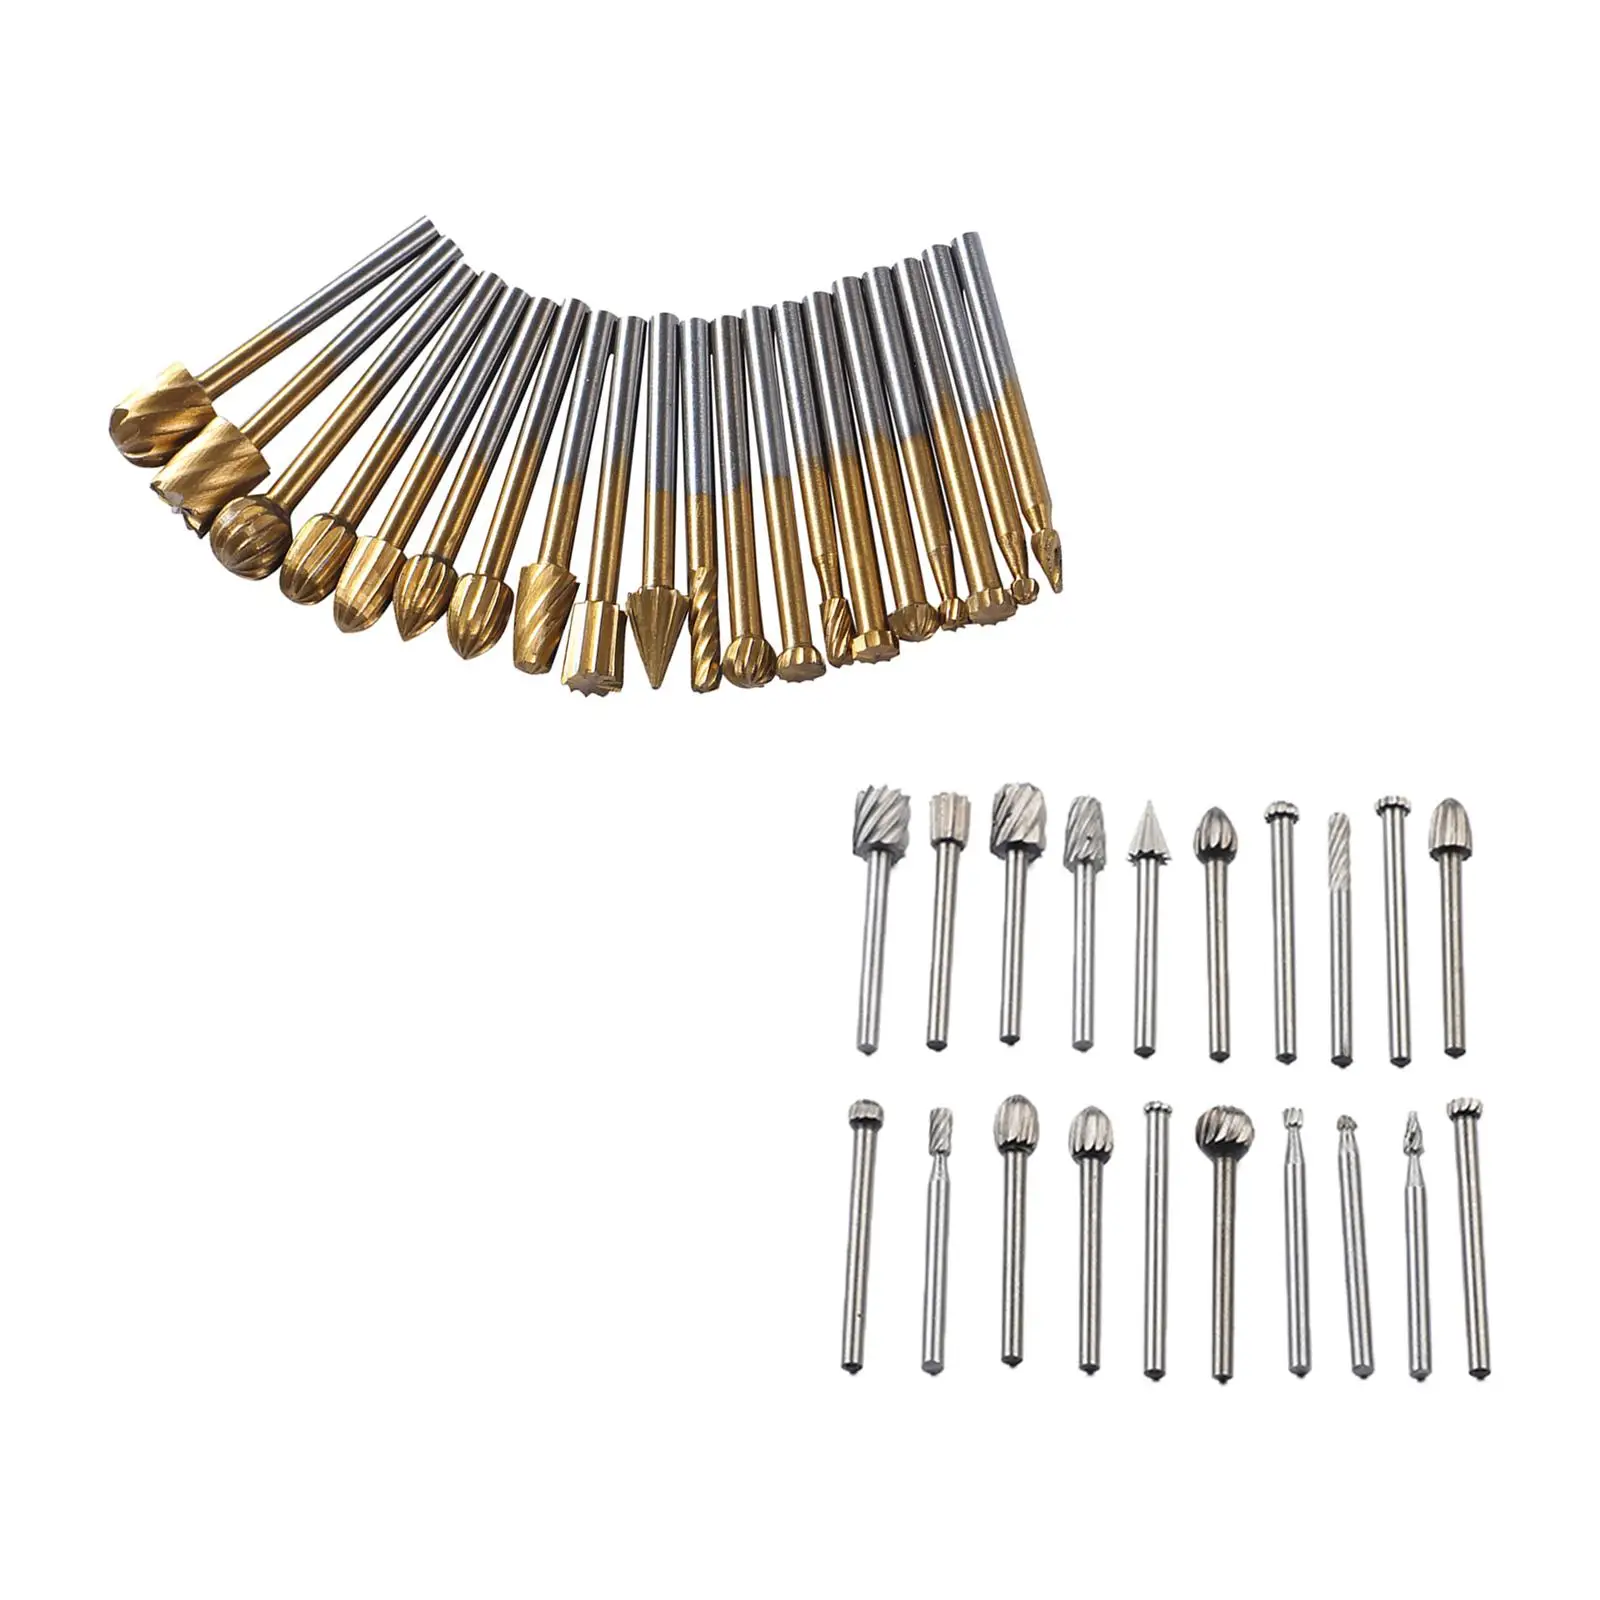 20Pcs Rotary Drill Set, Metal Grinding Rasp Drill for Drilling jewelries glass